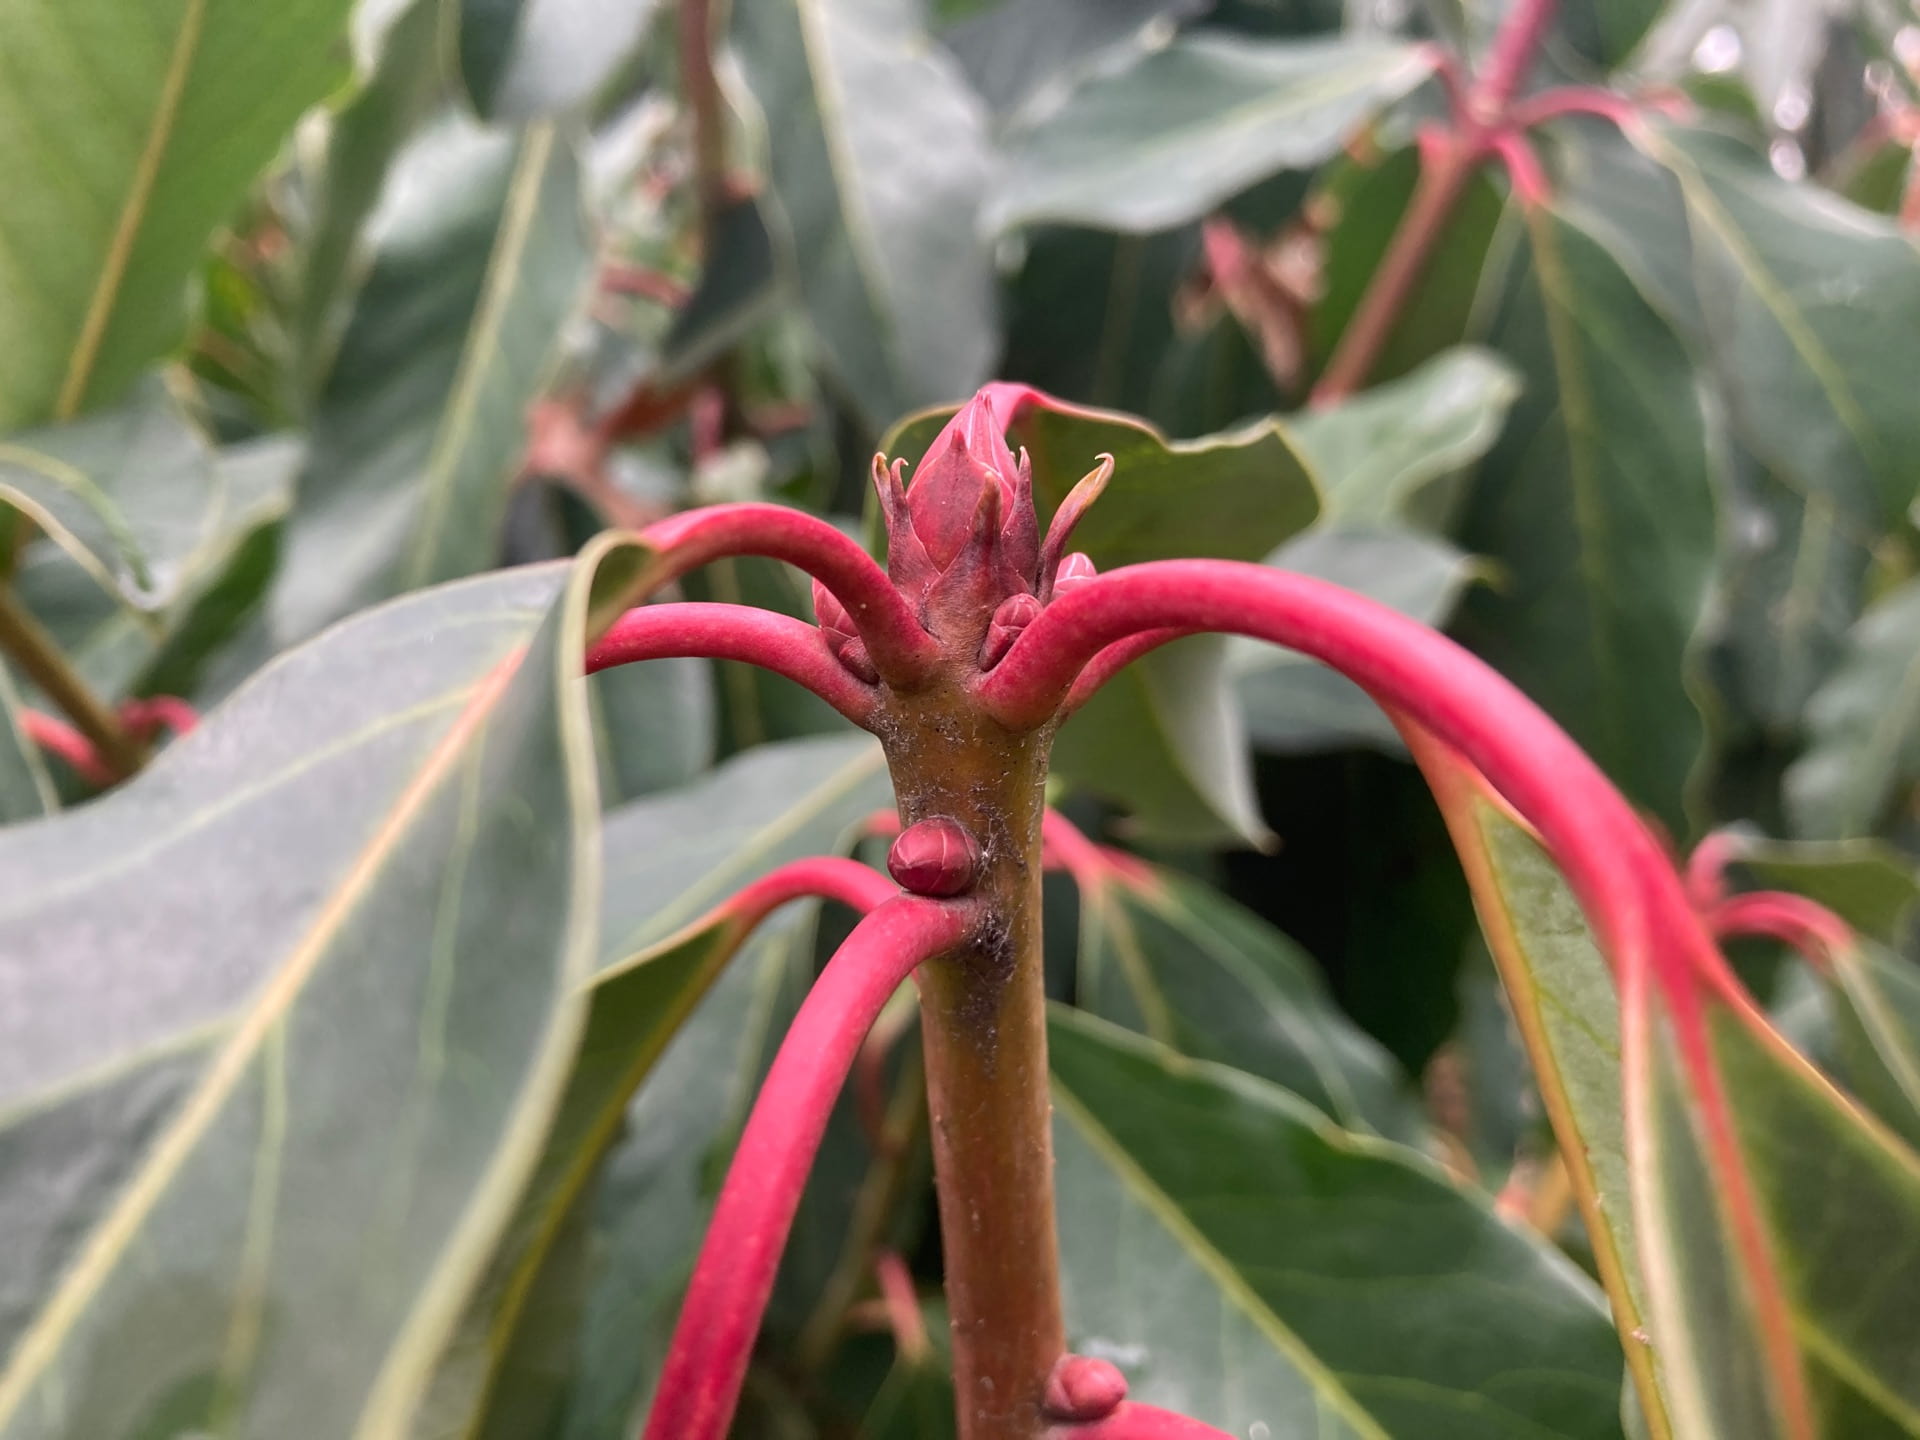 The bright red petioles of Daphniphyllum macropodum contrasts with the deep green leaves.